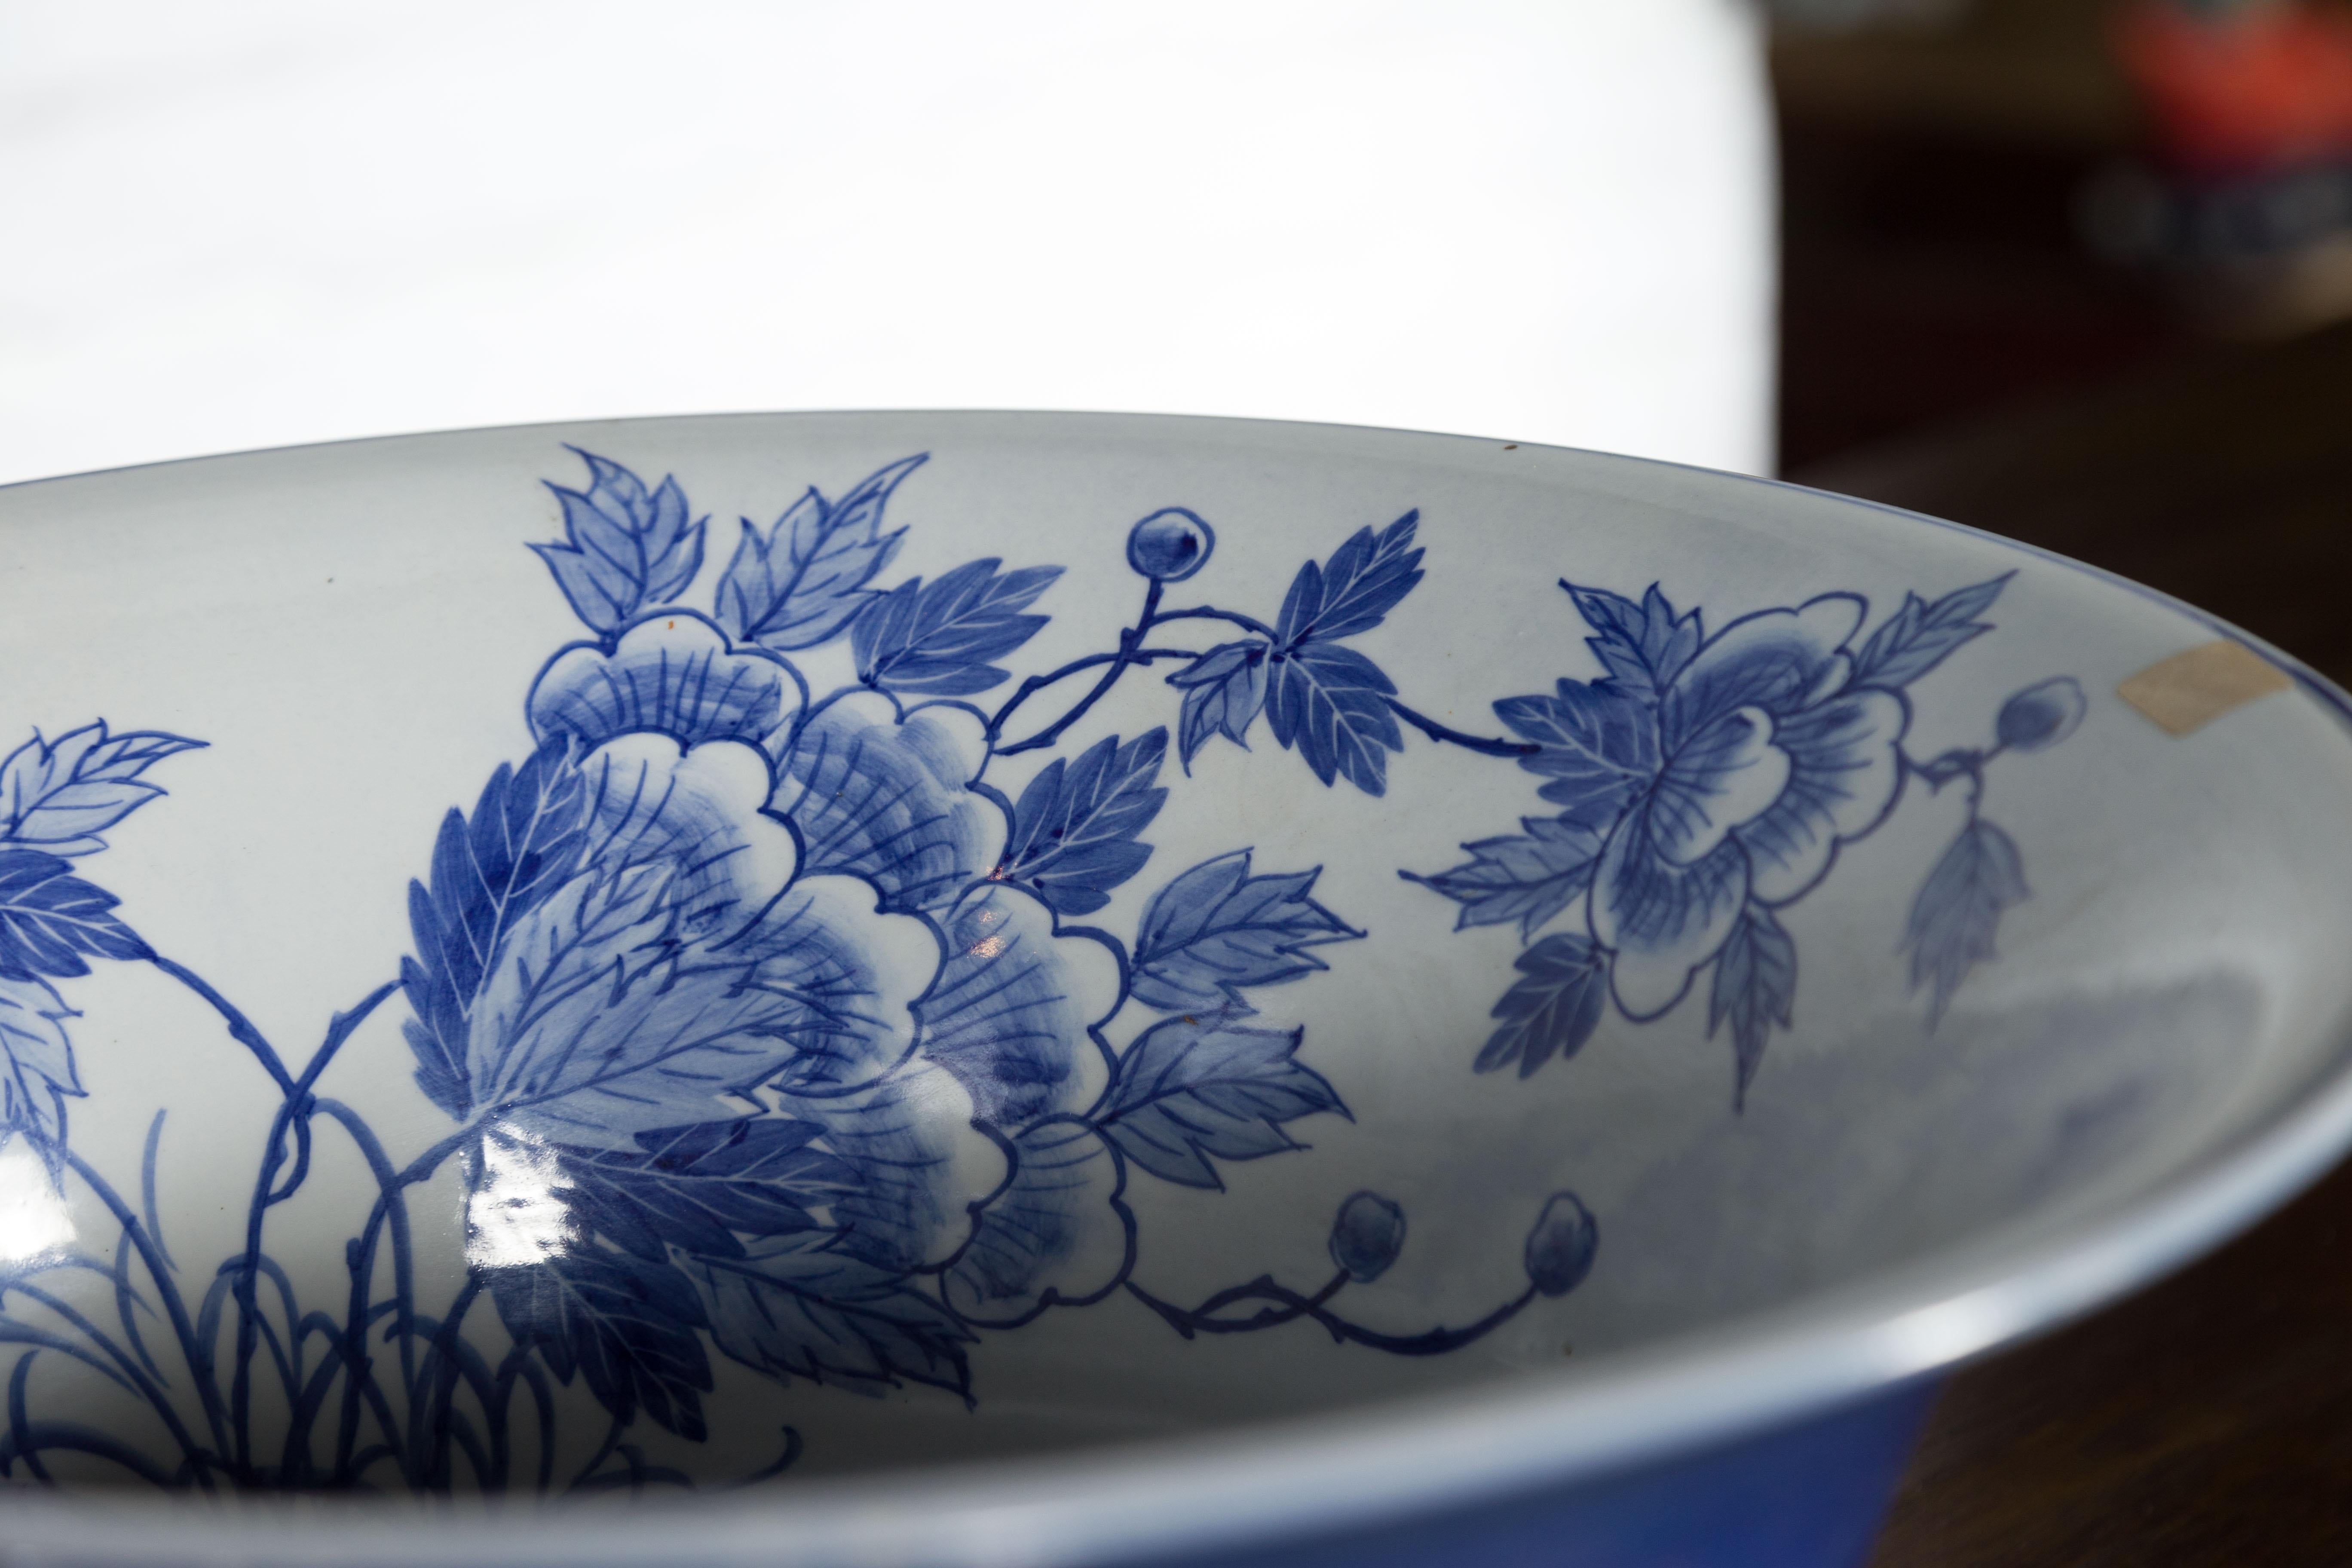 Chinese Blue and White Porcelain Wash Basin with Floral Motifs and Cobalt Blue For Sale 5